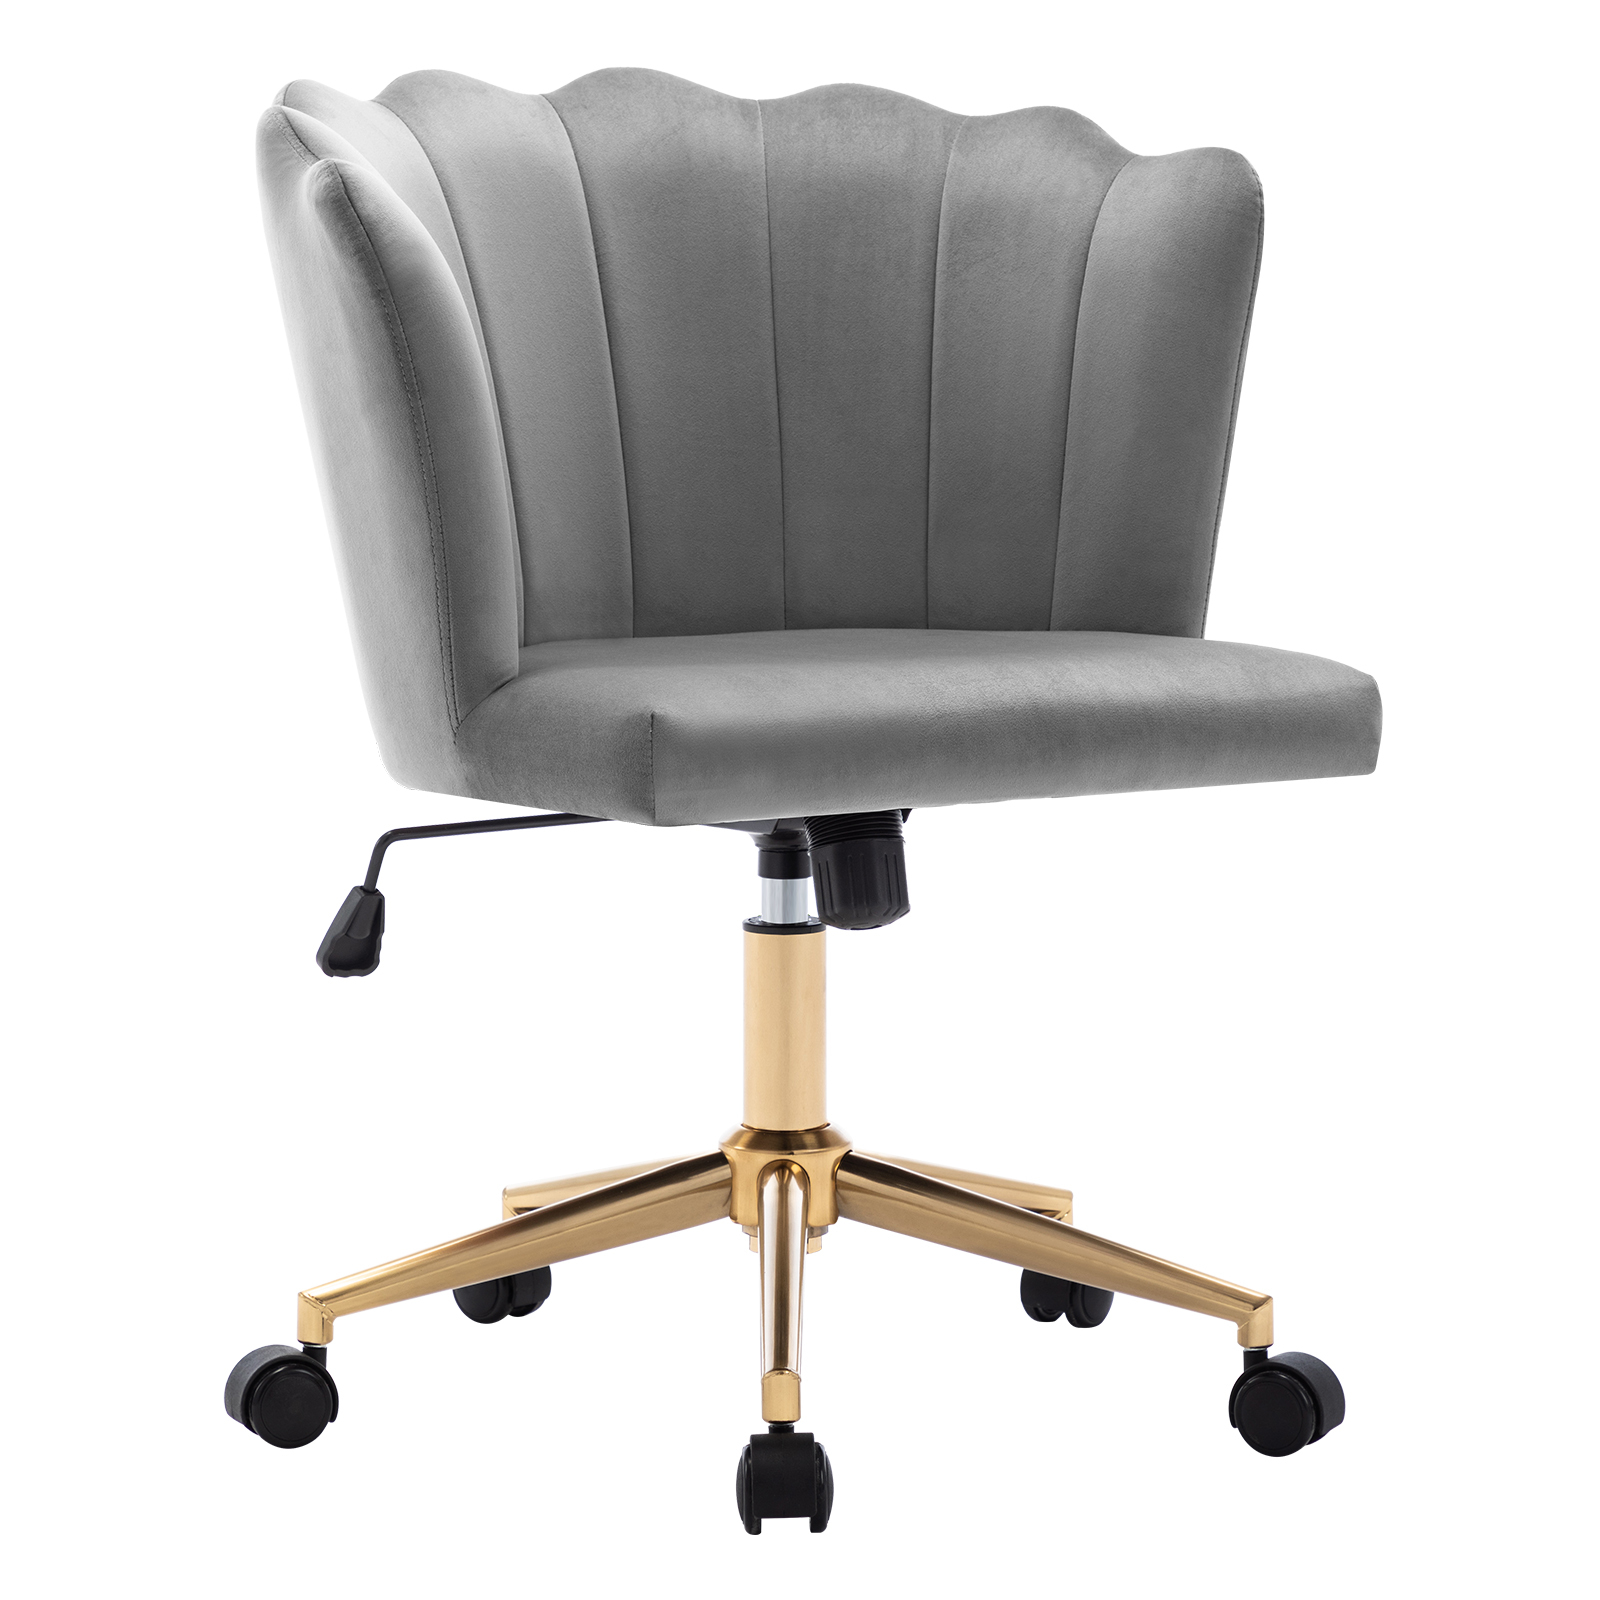 Duhome Home Office Chair Task Chair with Wheels Velvet Swivel Chair